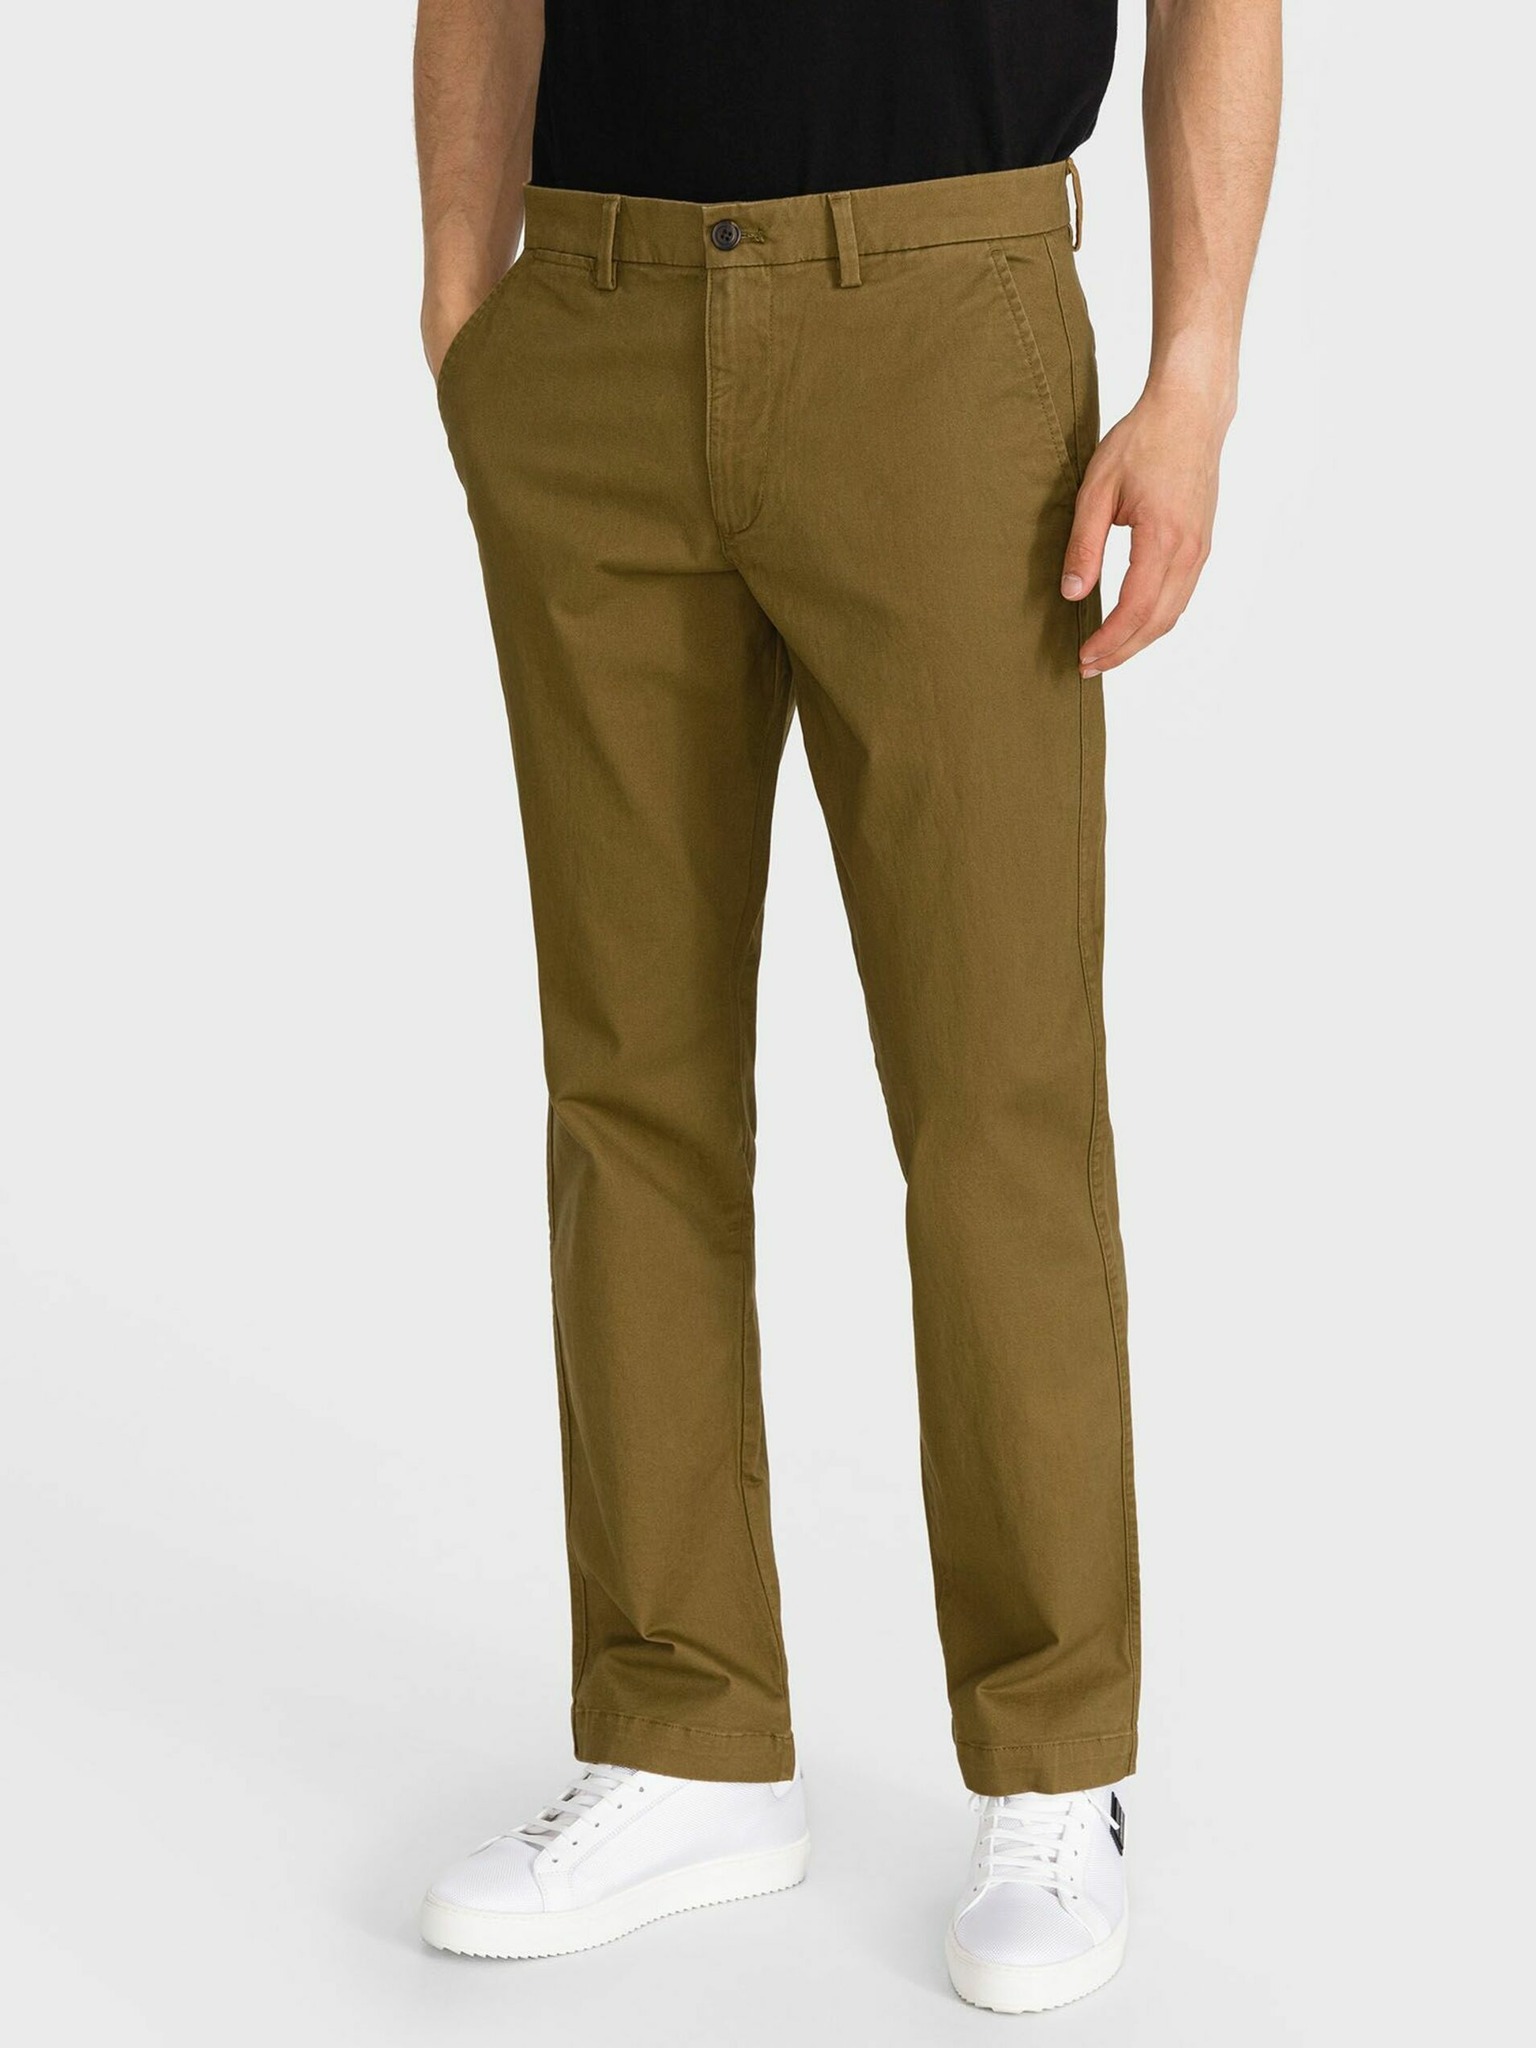 Men's Grey Casual Trousers | M&S